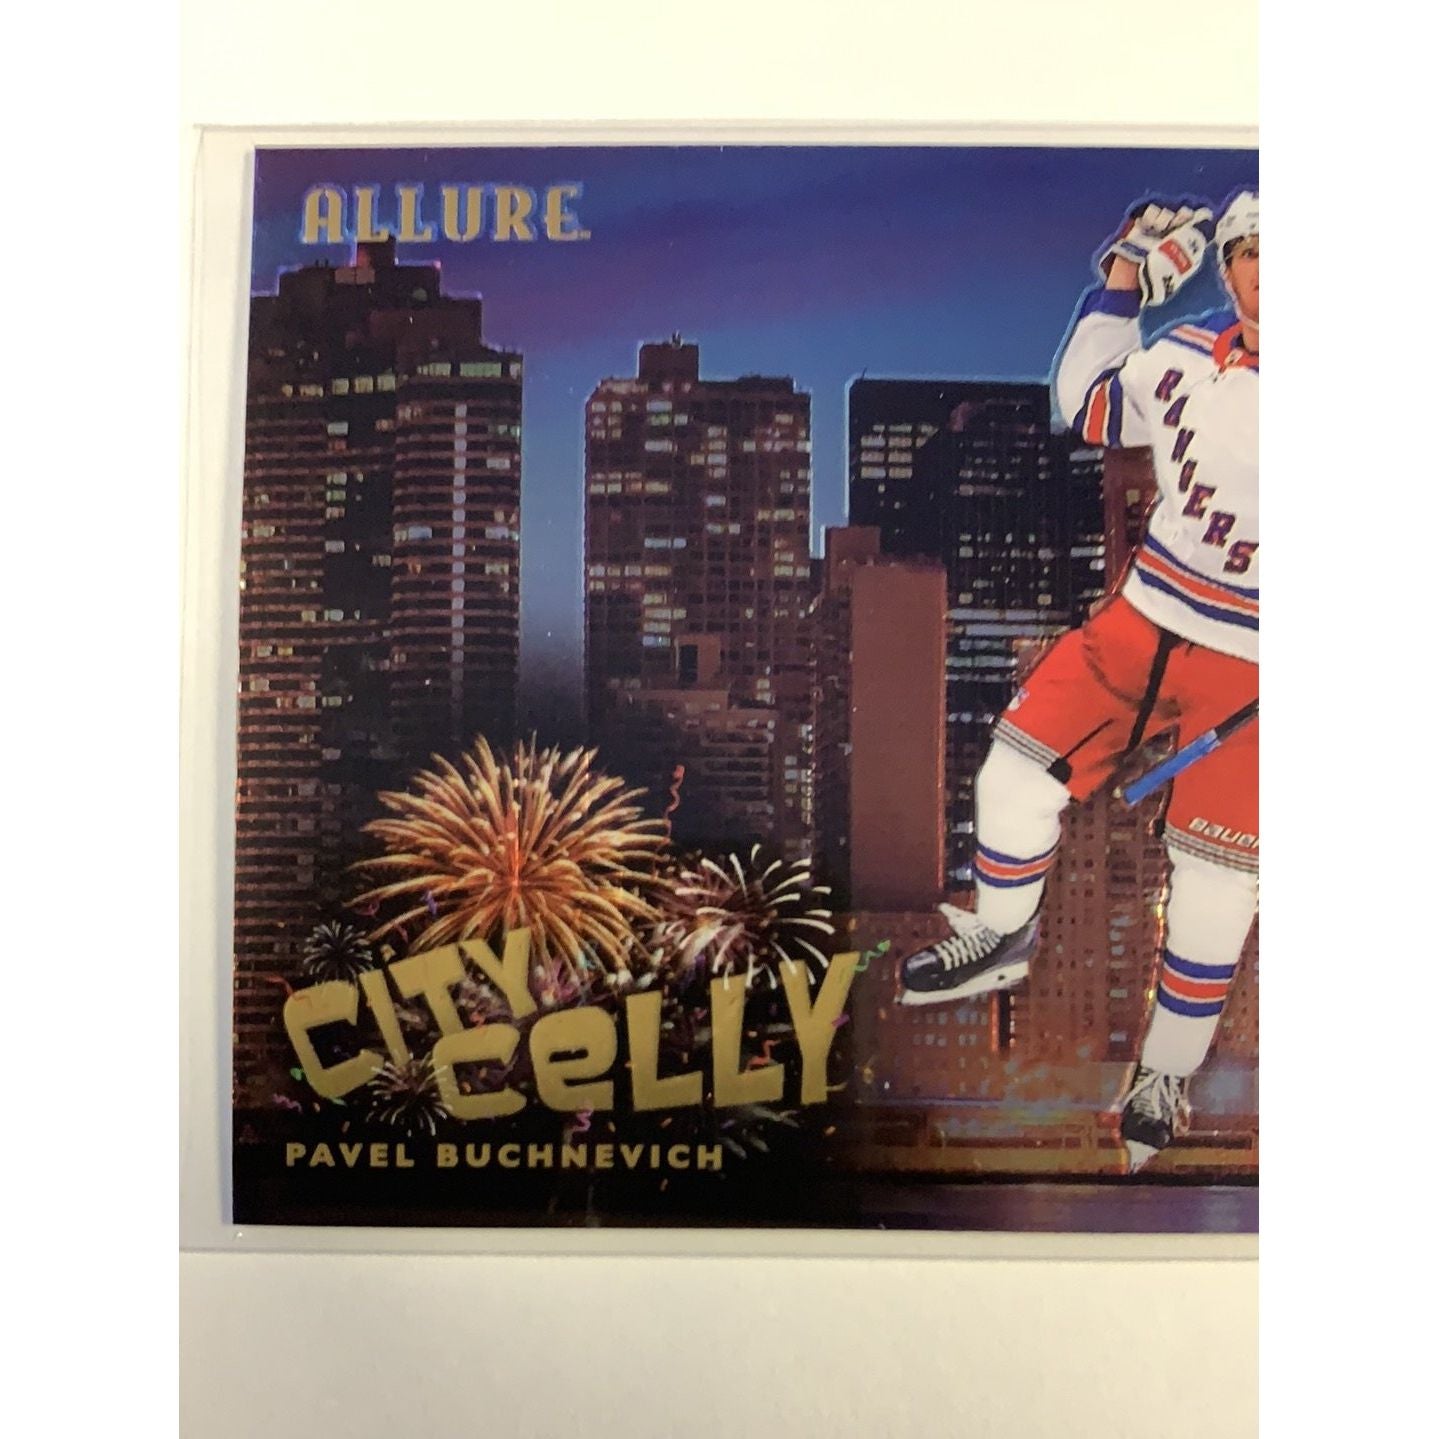  2020-21 Allure Pavel Buchnevich City Celly  Local Legends Cards & Collectibles